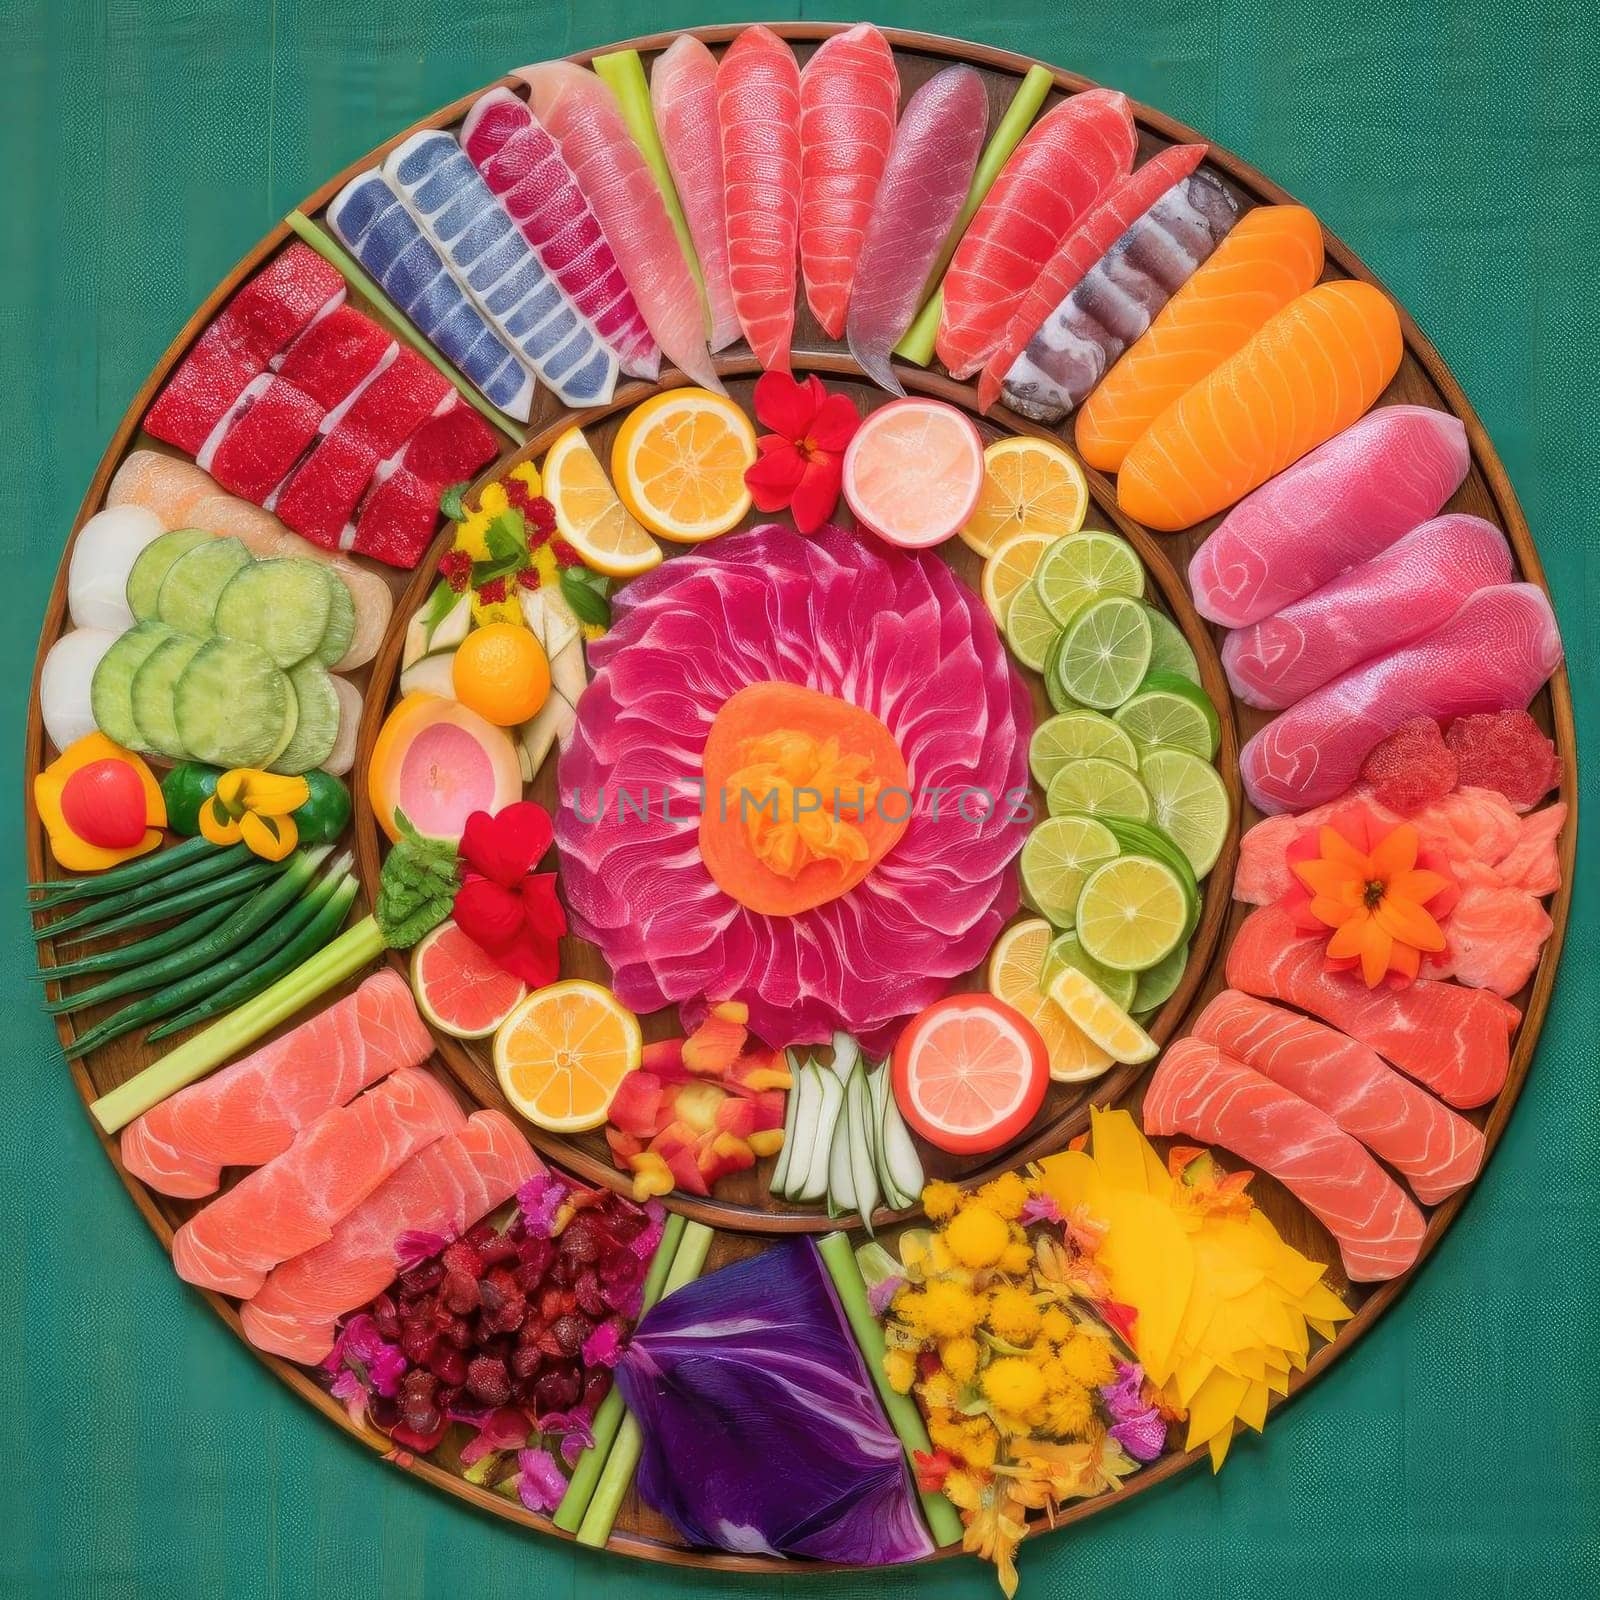 Sashimi of different shapes and colors on a plate on a green background (ID: 001350)